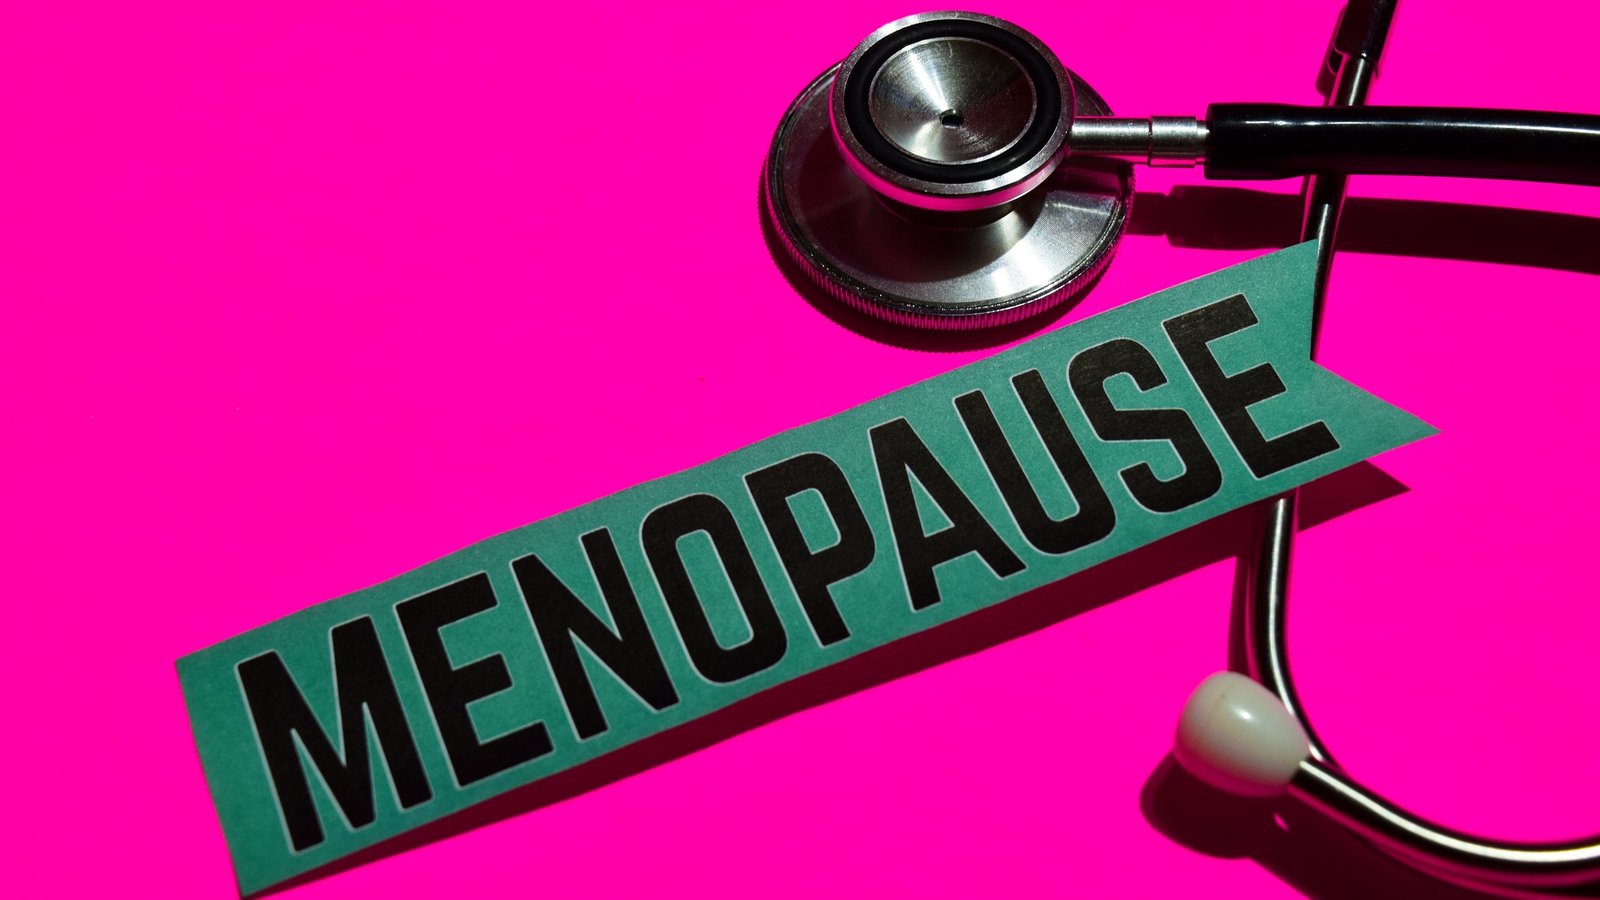 Menopause clinic is first of its kind in Ireland